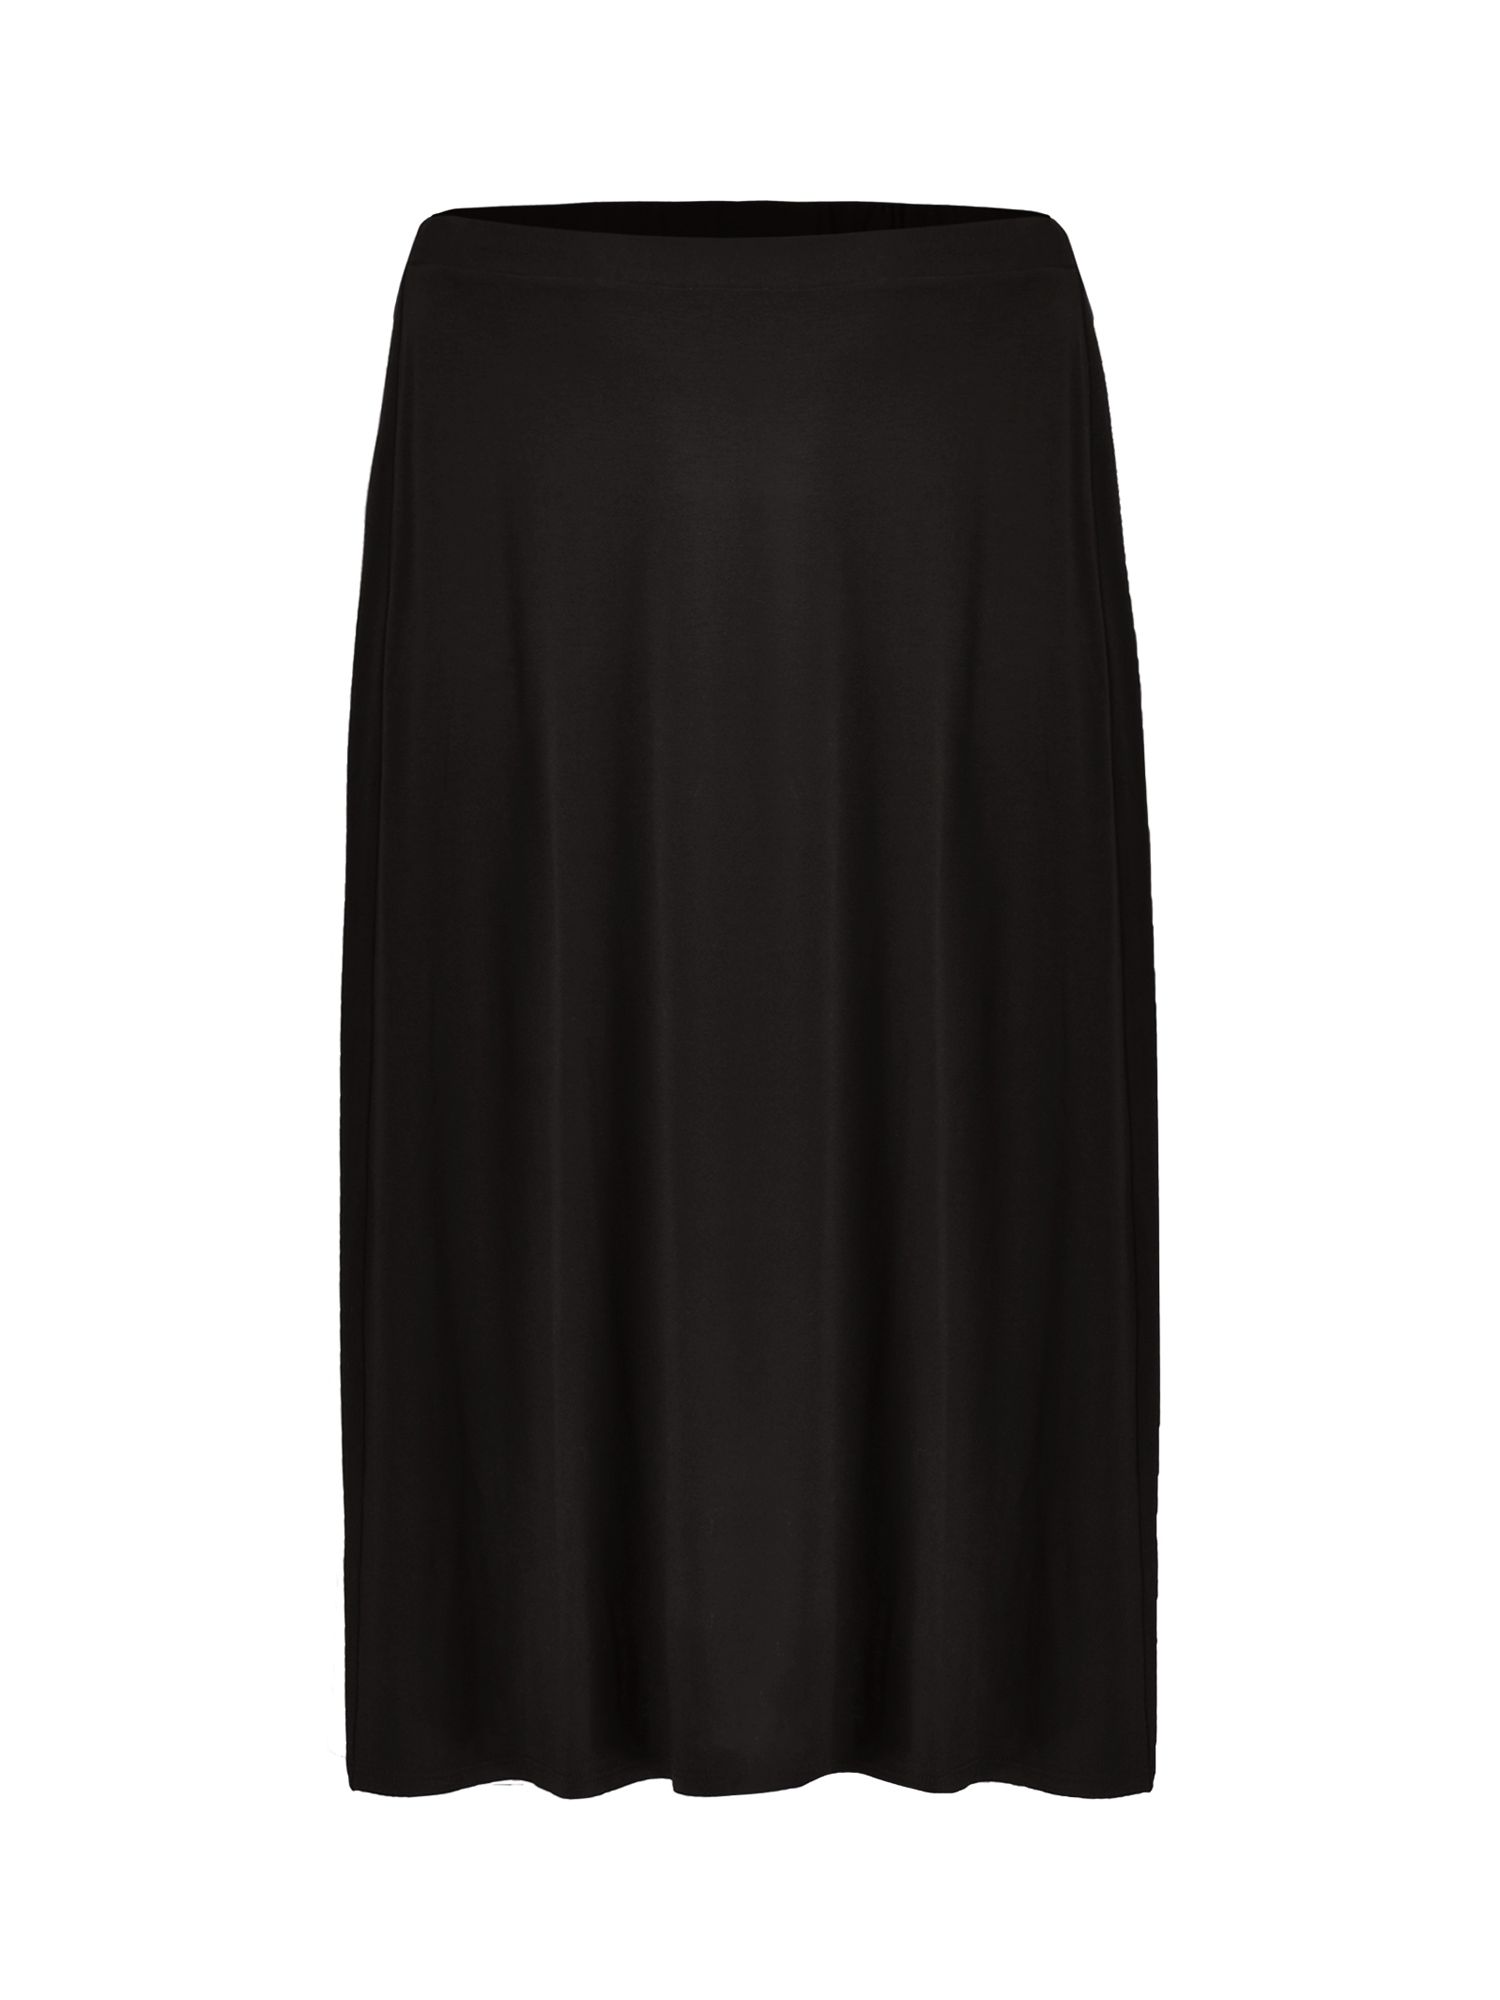 Buy Live Unlimited Curve Jersey Midi Skirt Online at johnlewis.com